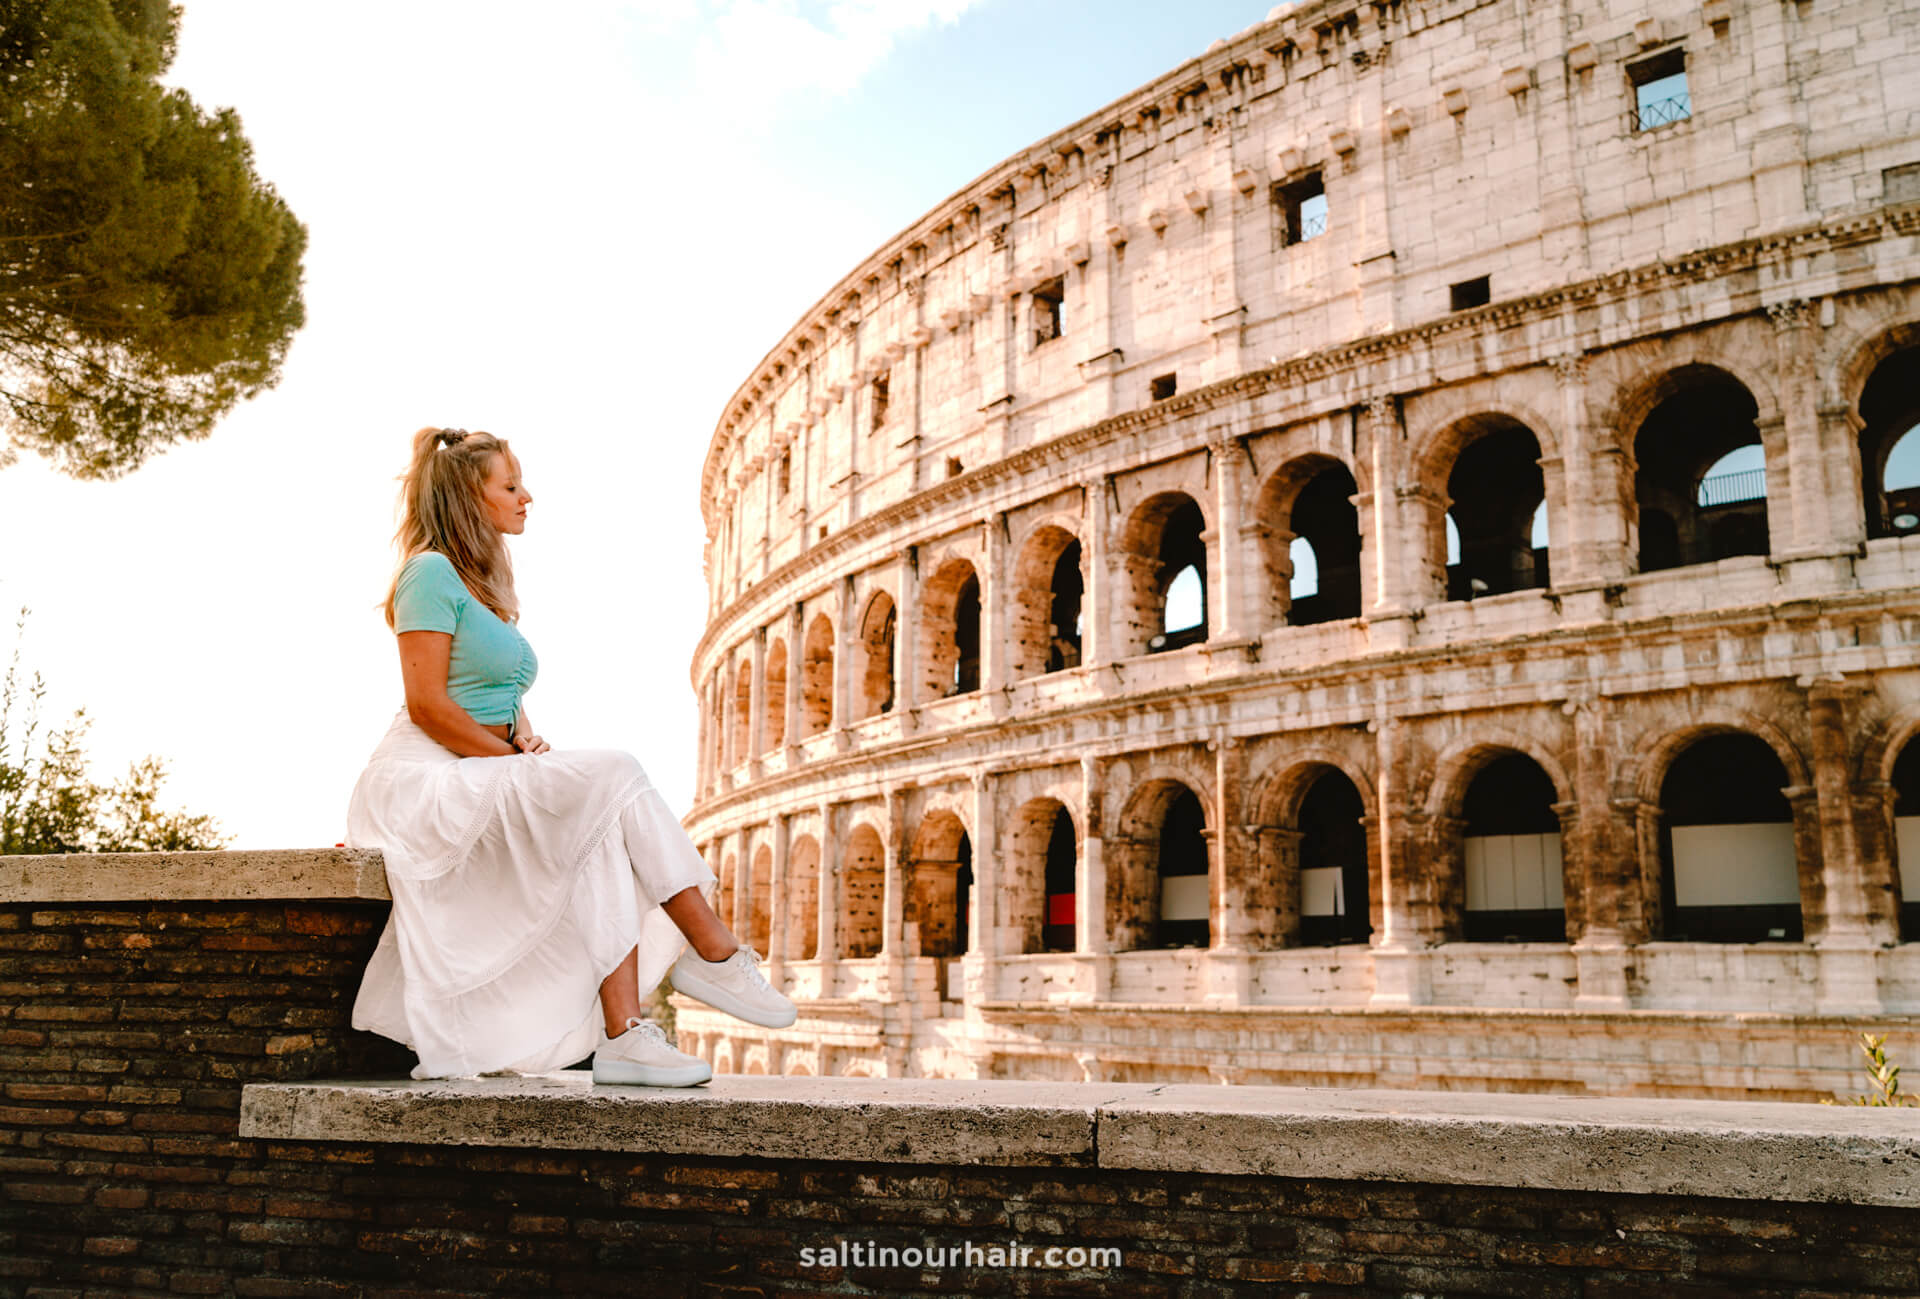 colosseum rome italy itinerary 7 days